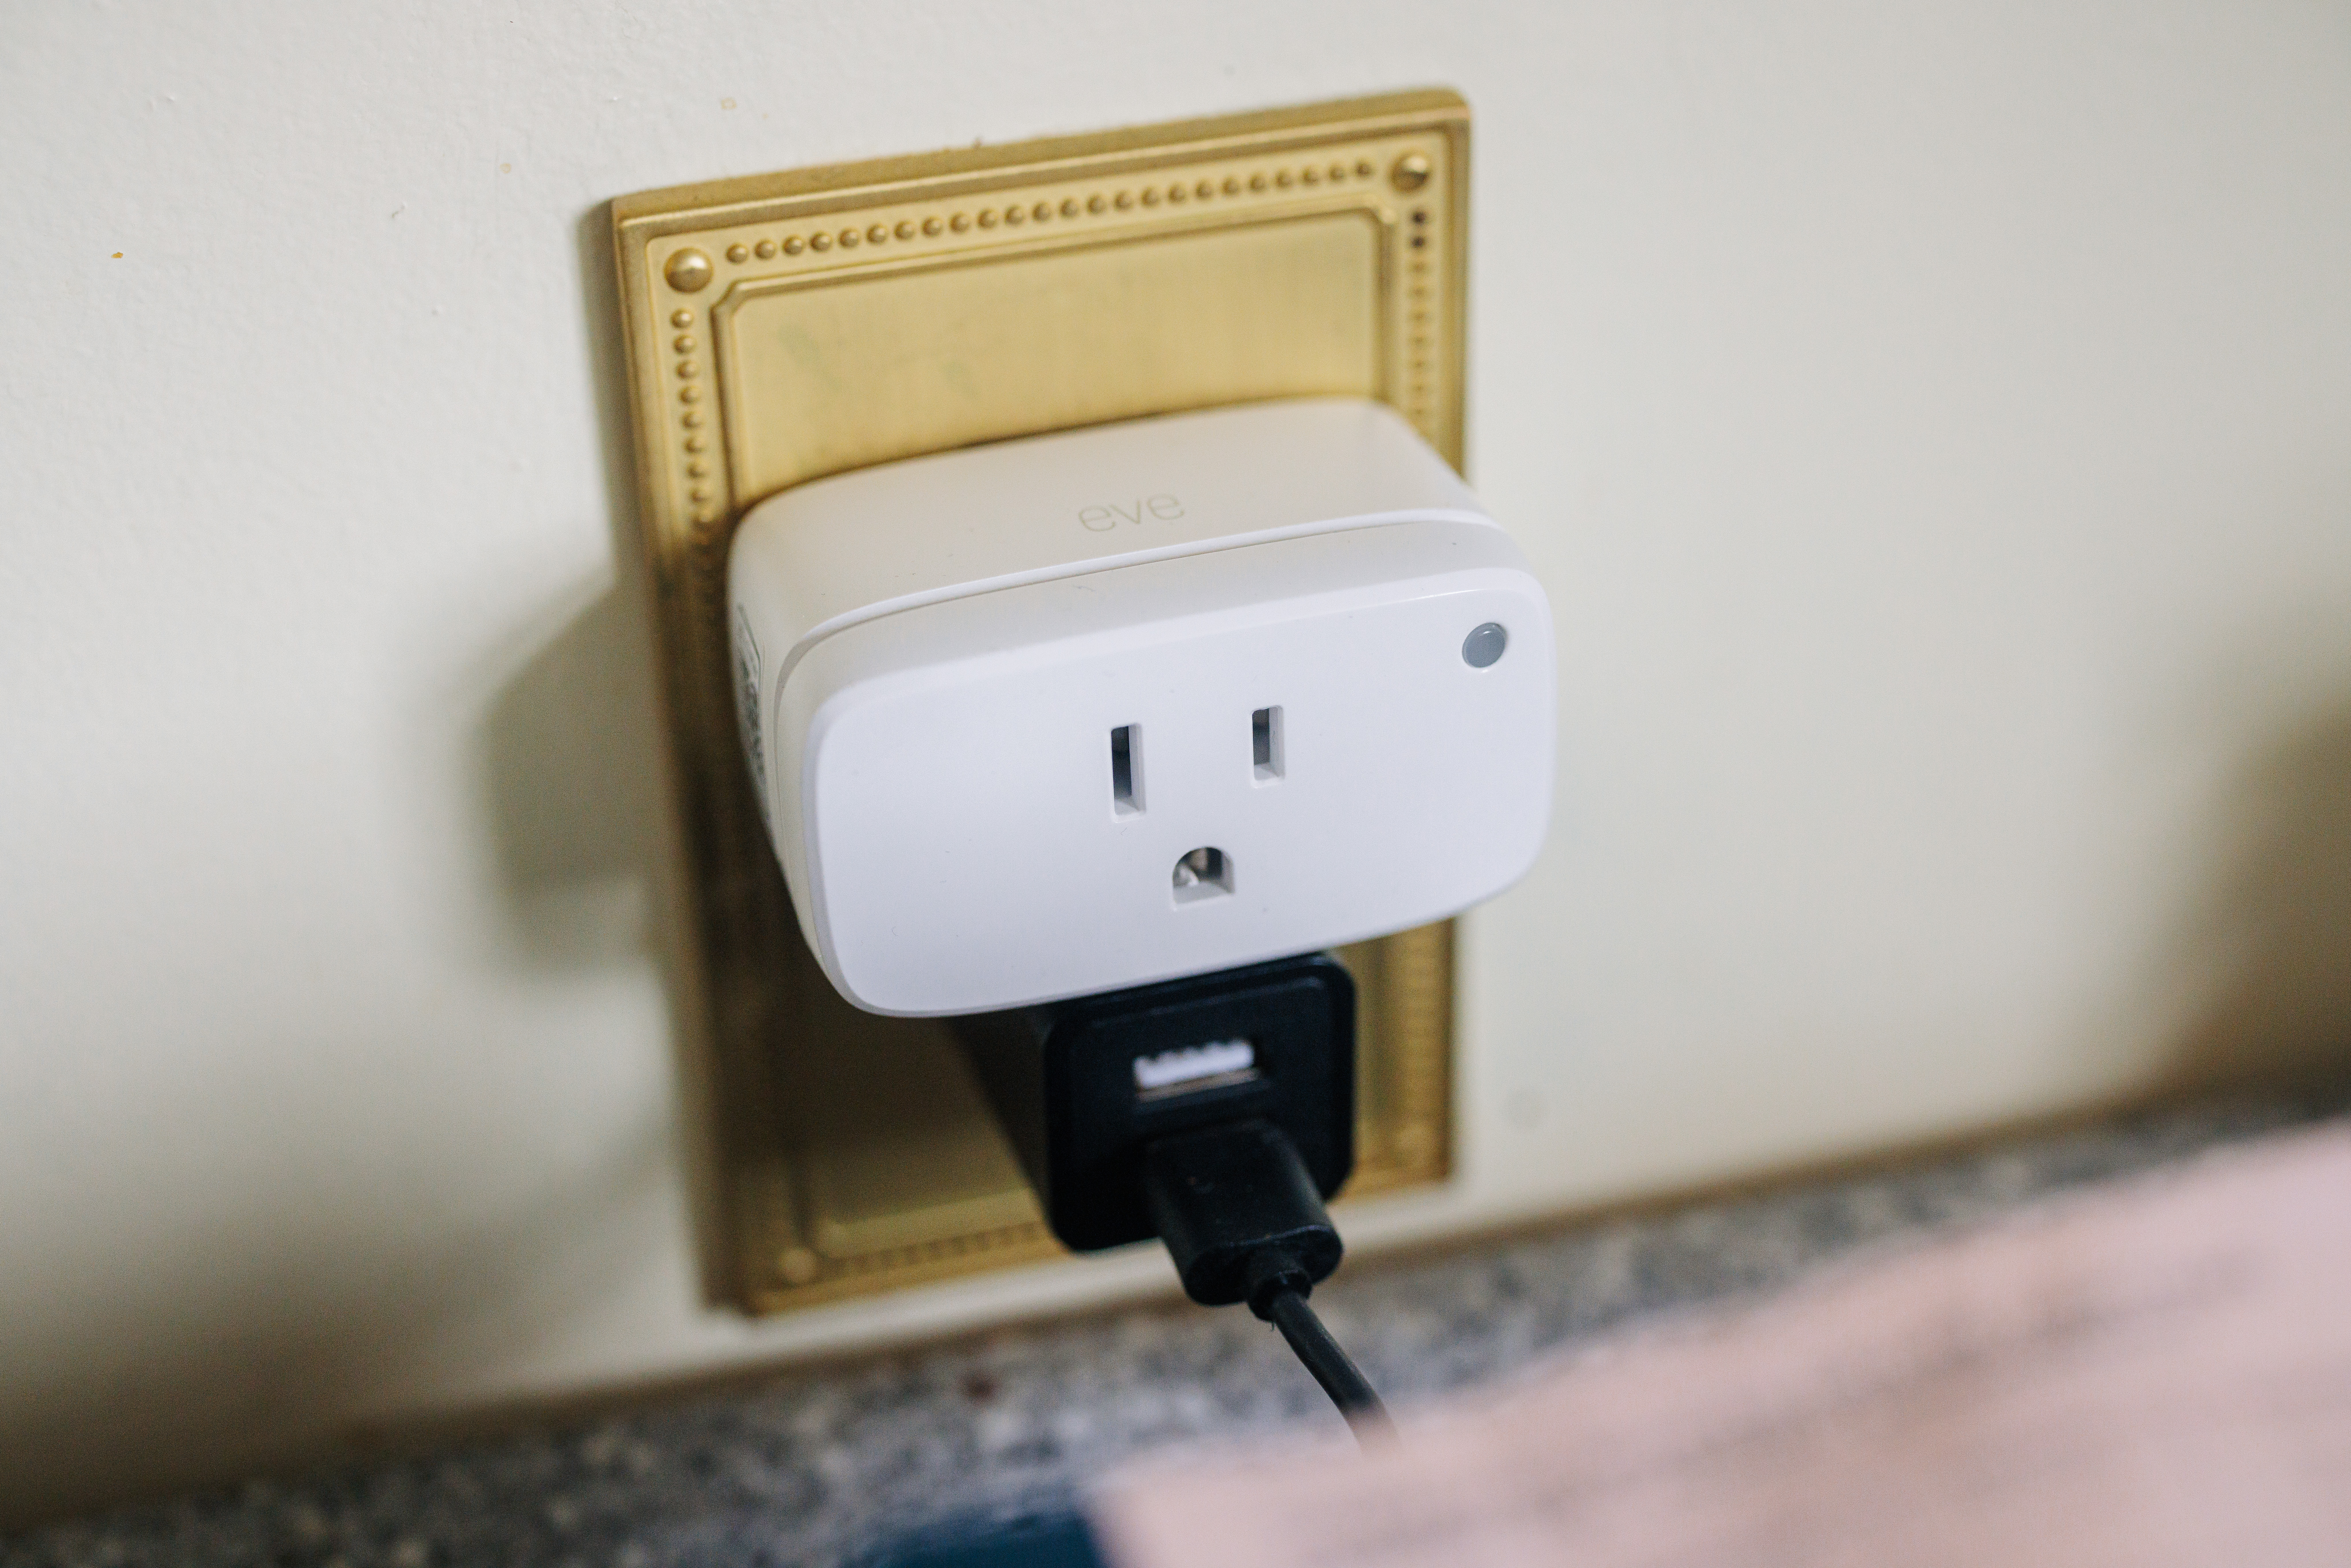 Eve Smart Plug and power meter plugged into an outlet with another power brick